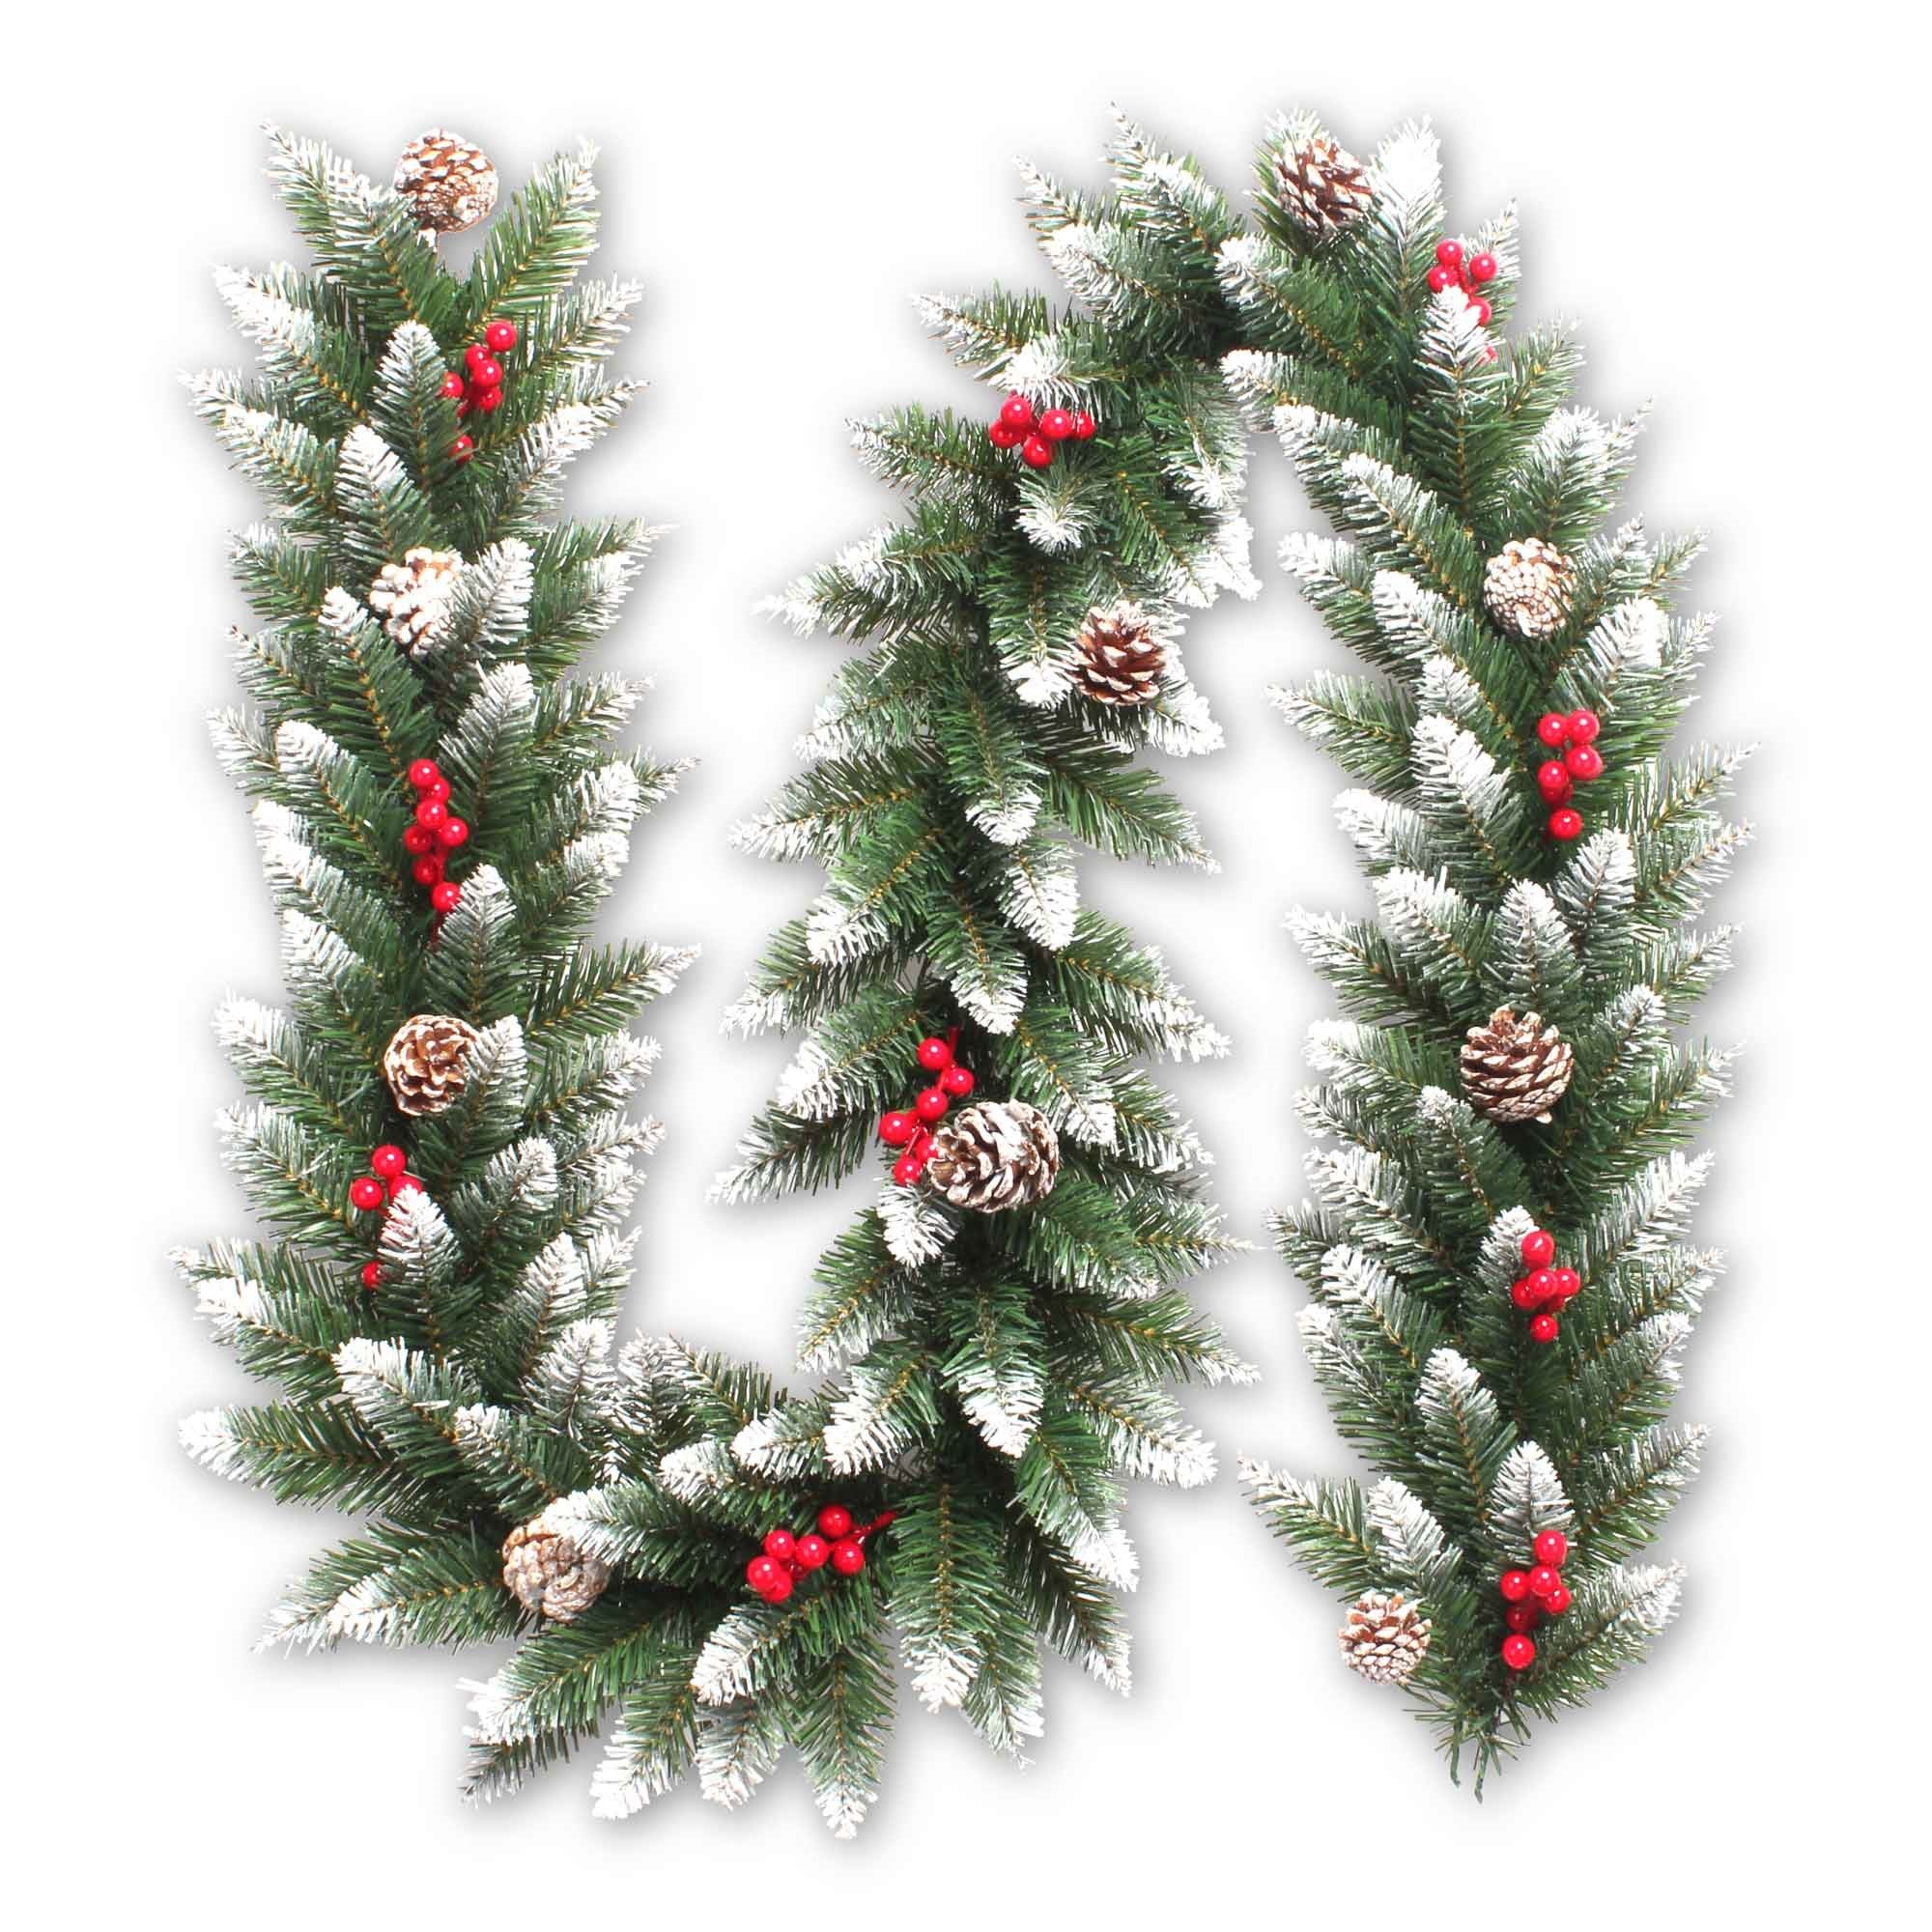 Christmas Sparkle Luxury Nevada Christmas Garland with Pinecones and Berries 2m - Green  | TJ Hughes